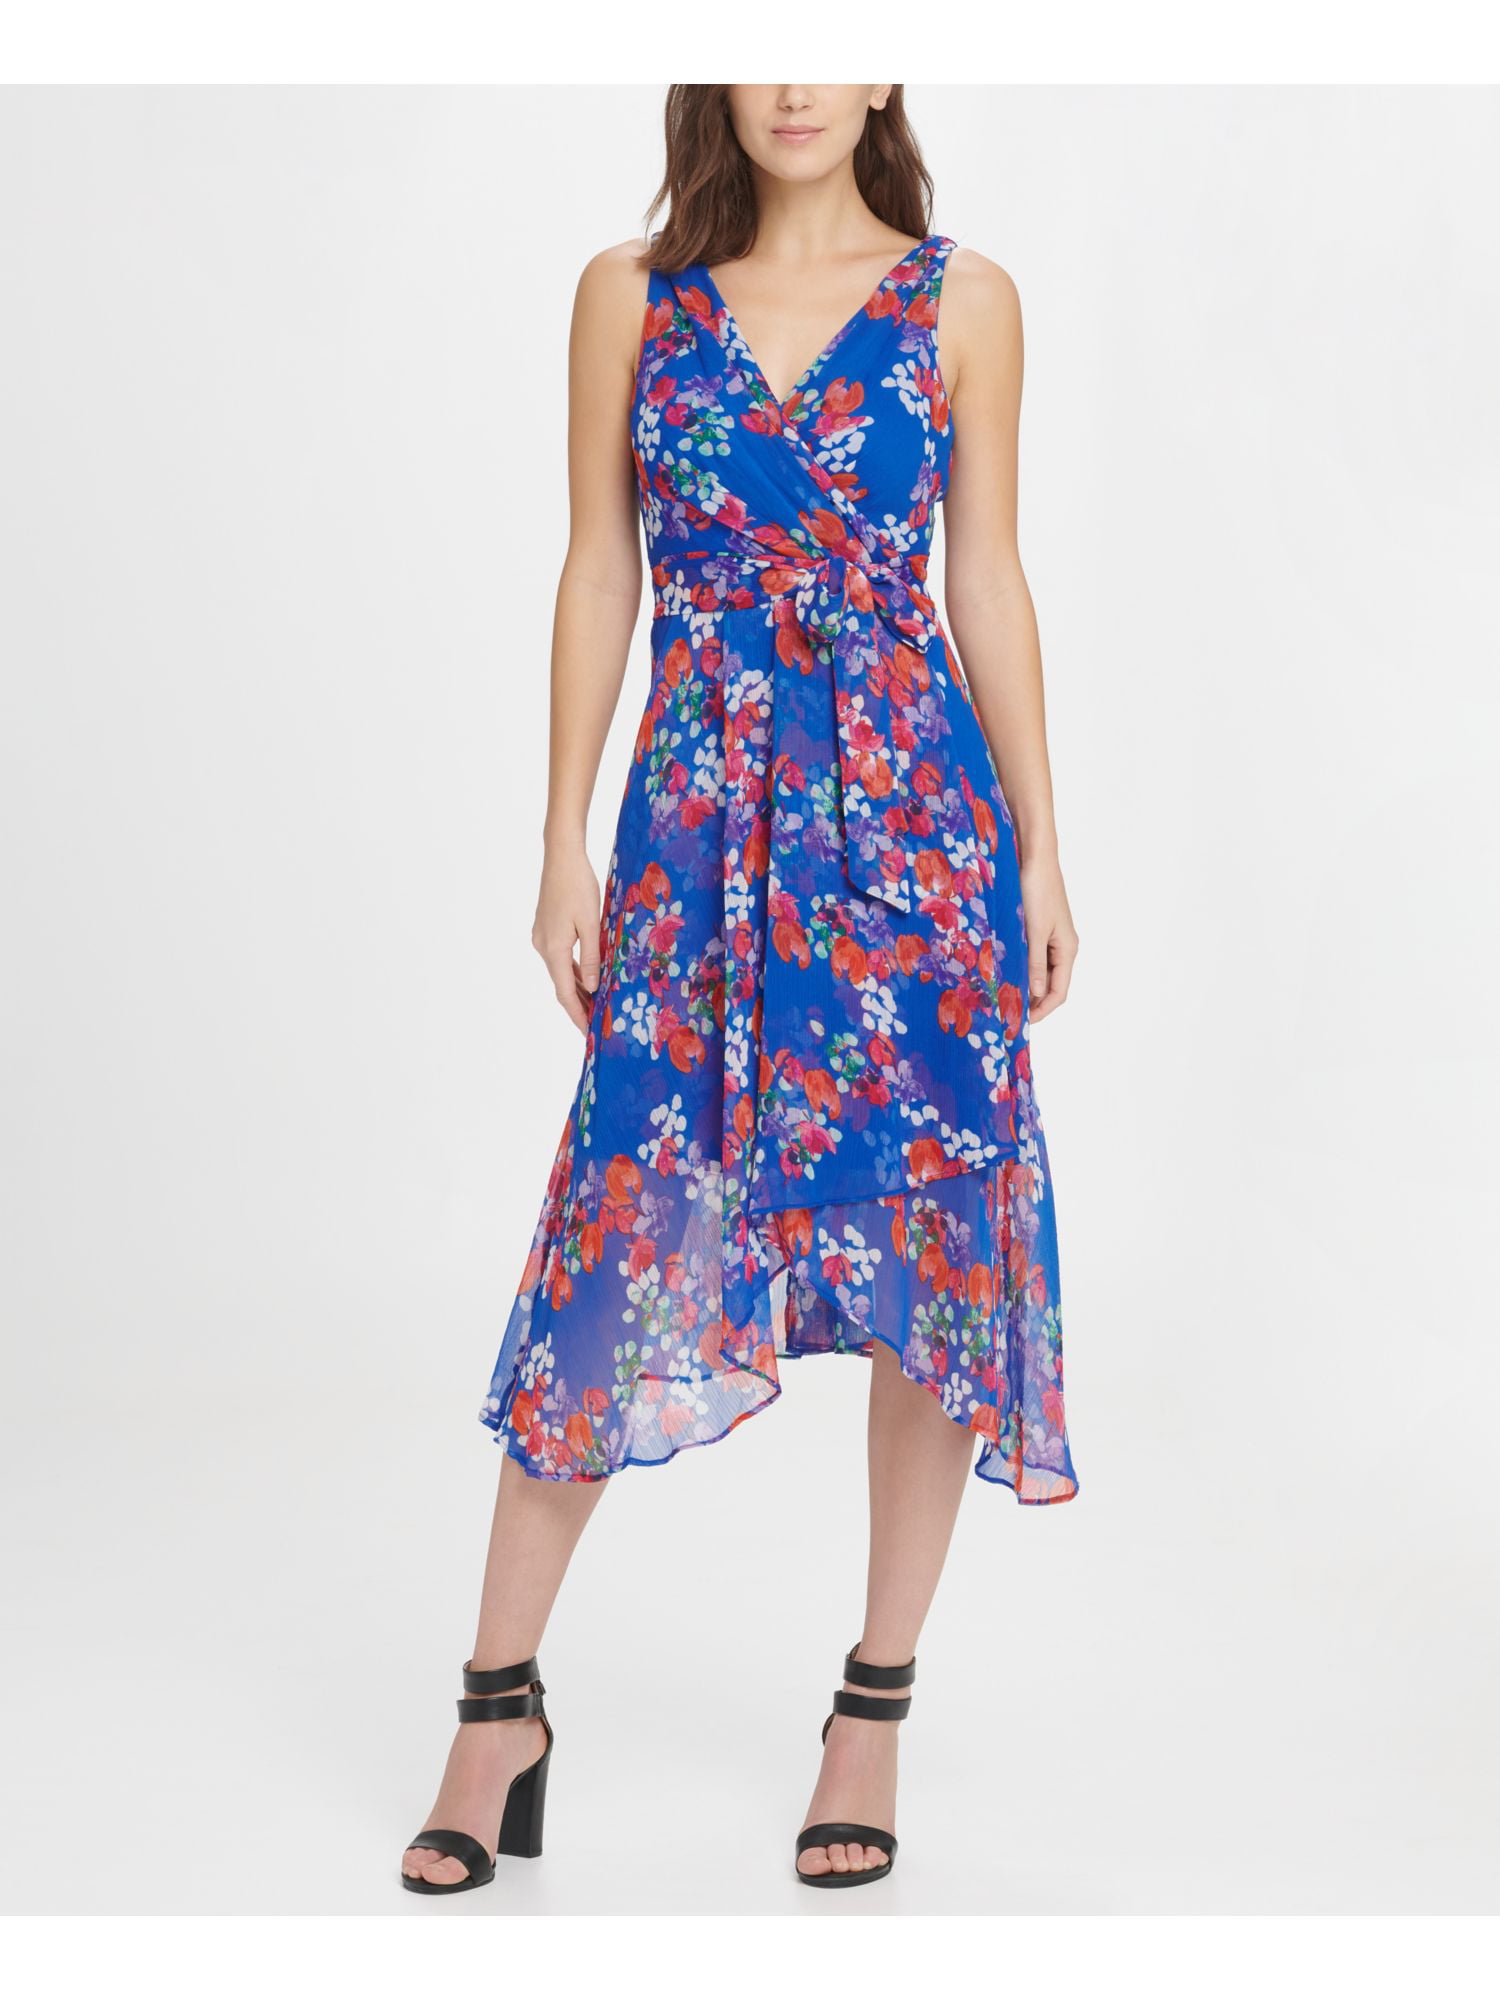 DKNY $129 Womens New Blue Floral Belted ...